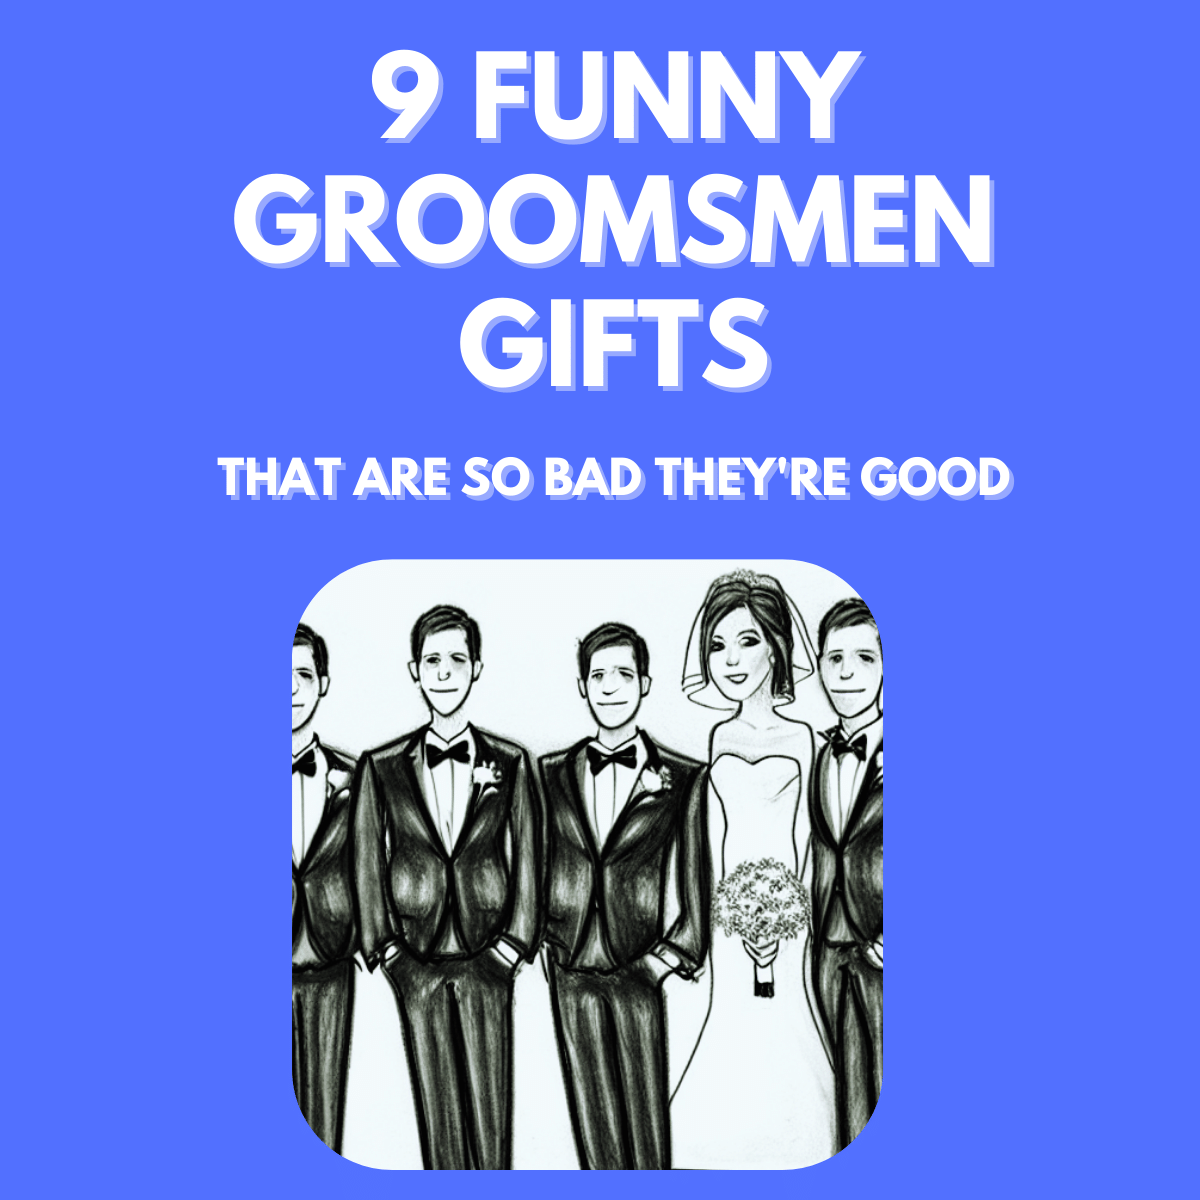 These 9 Funny Groomsmen Gifts  are So Bad They're Good